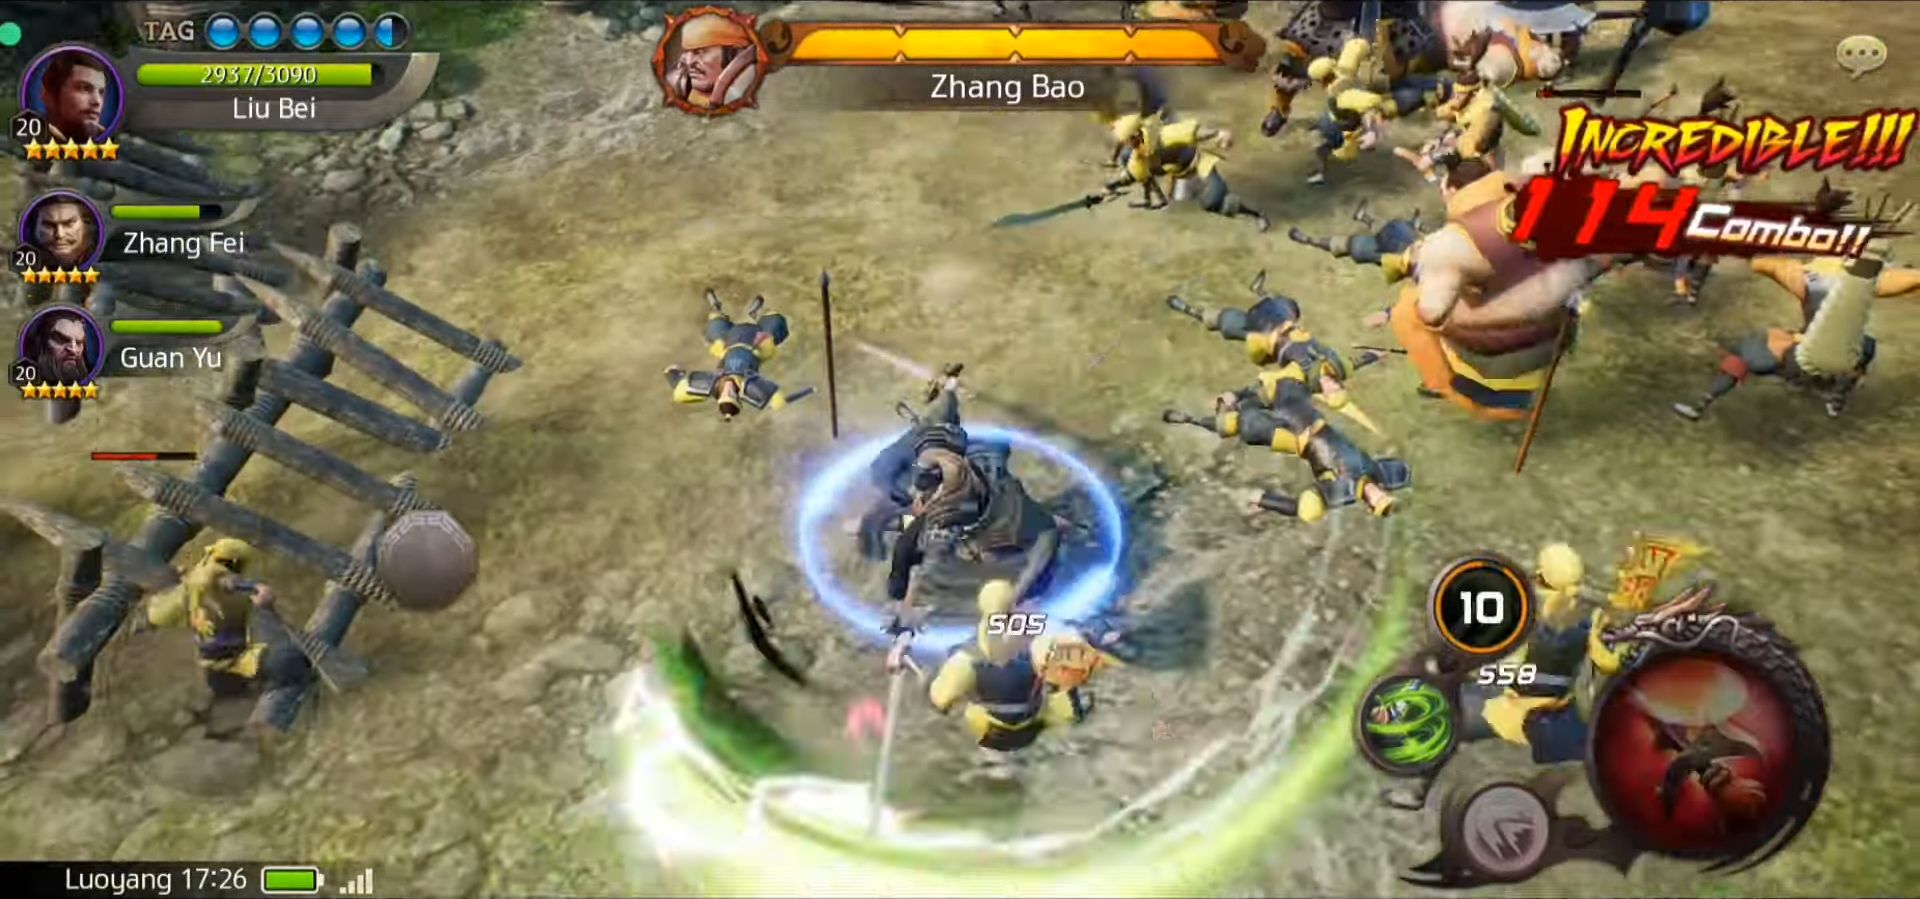 Gameplay of the Three Kingdoms: Legends of War for Android phone or tablet.